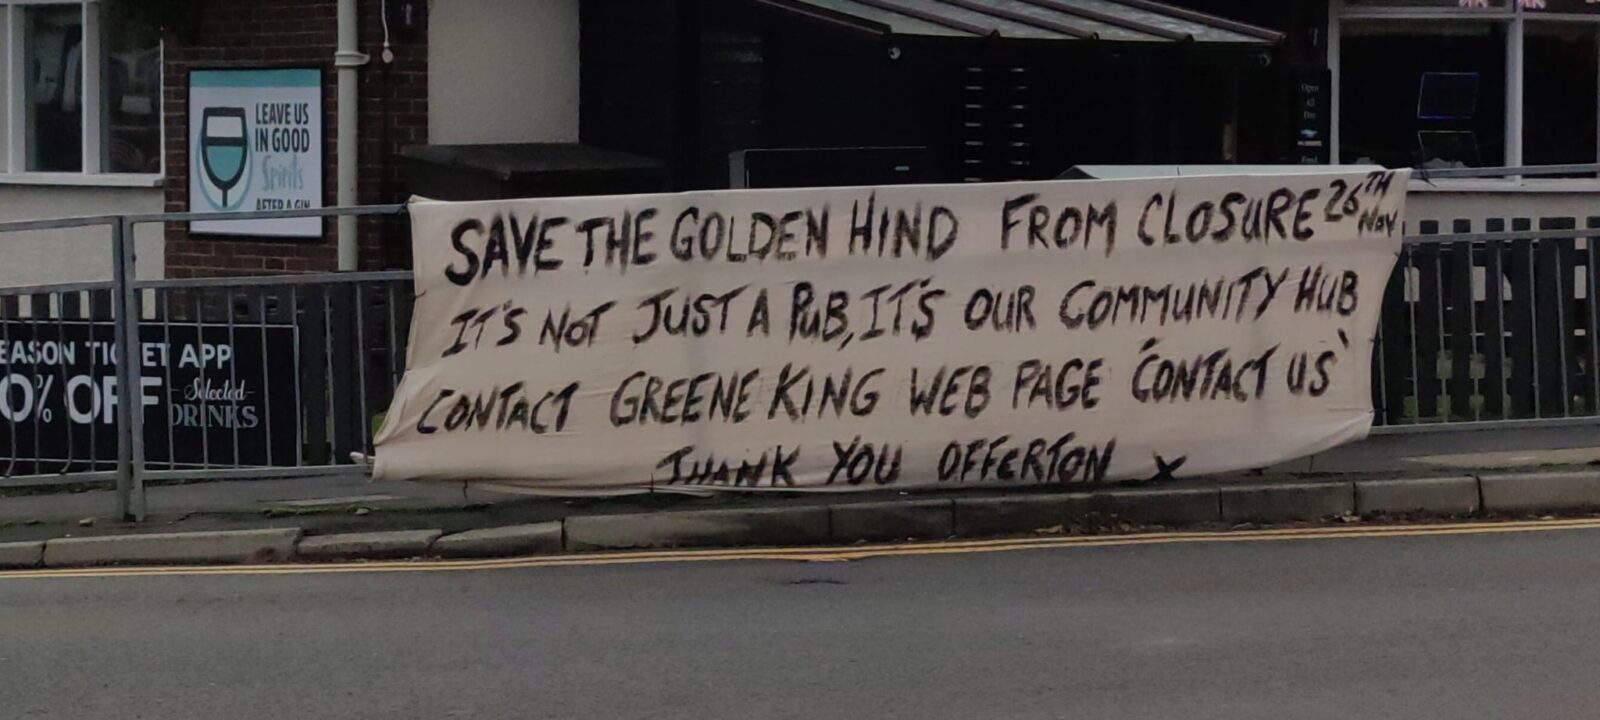 save the golden hind offerton closing sign